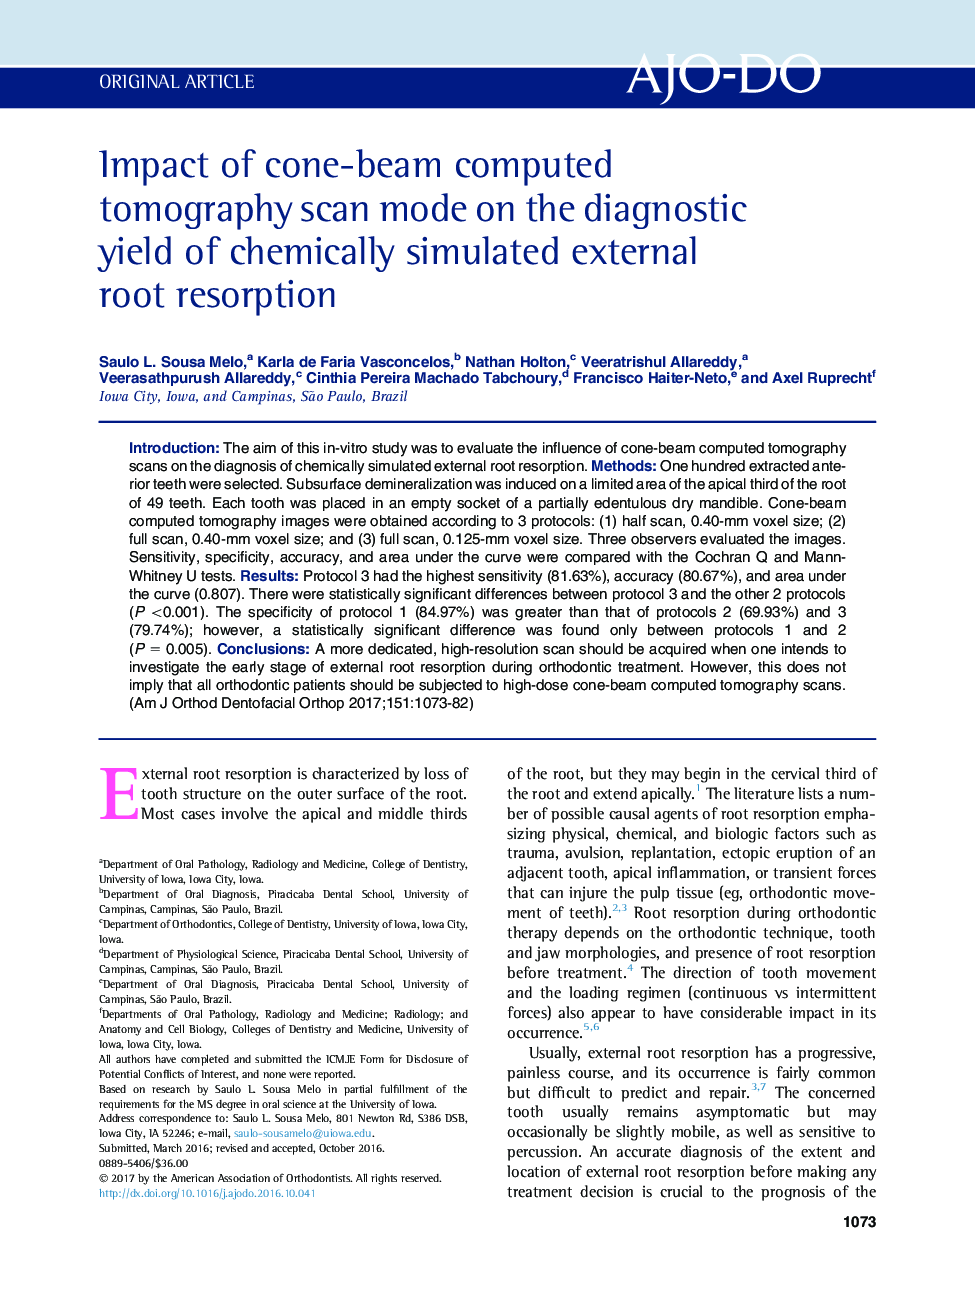 Impact of cone-beam computed tomography scan mode on the diagnostic yield of chemically simulated external root resorption